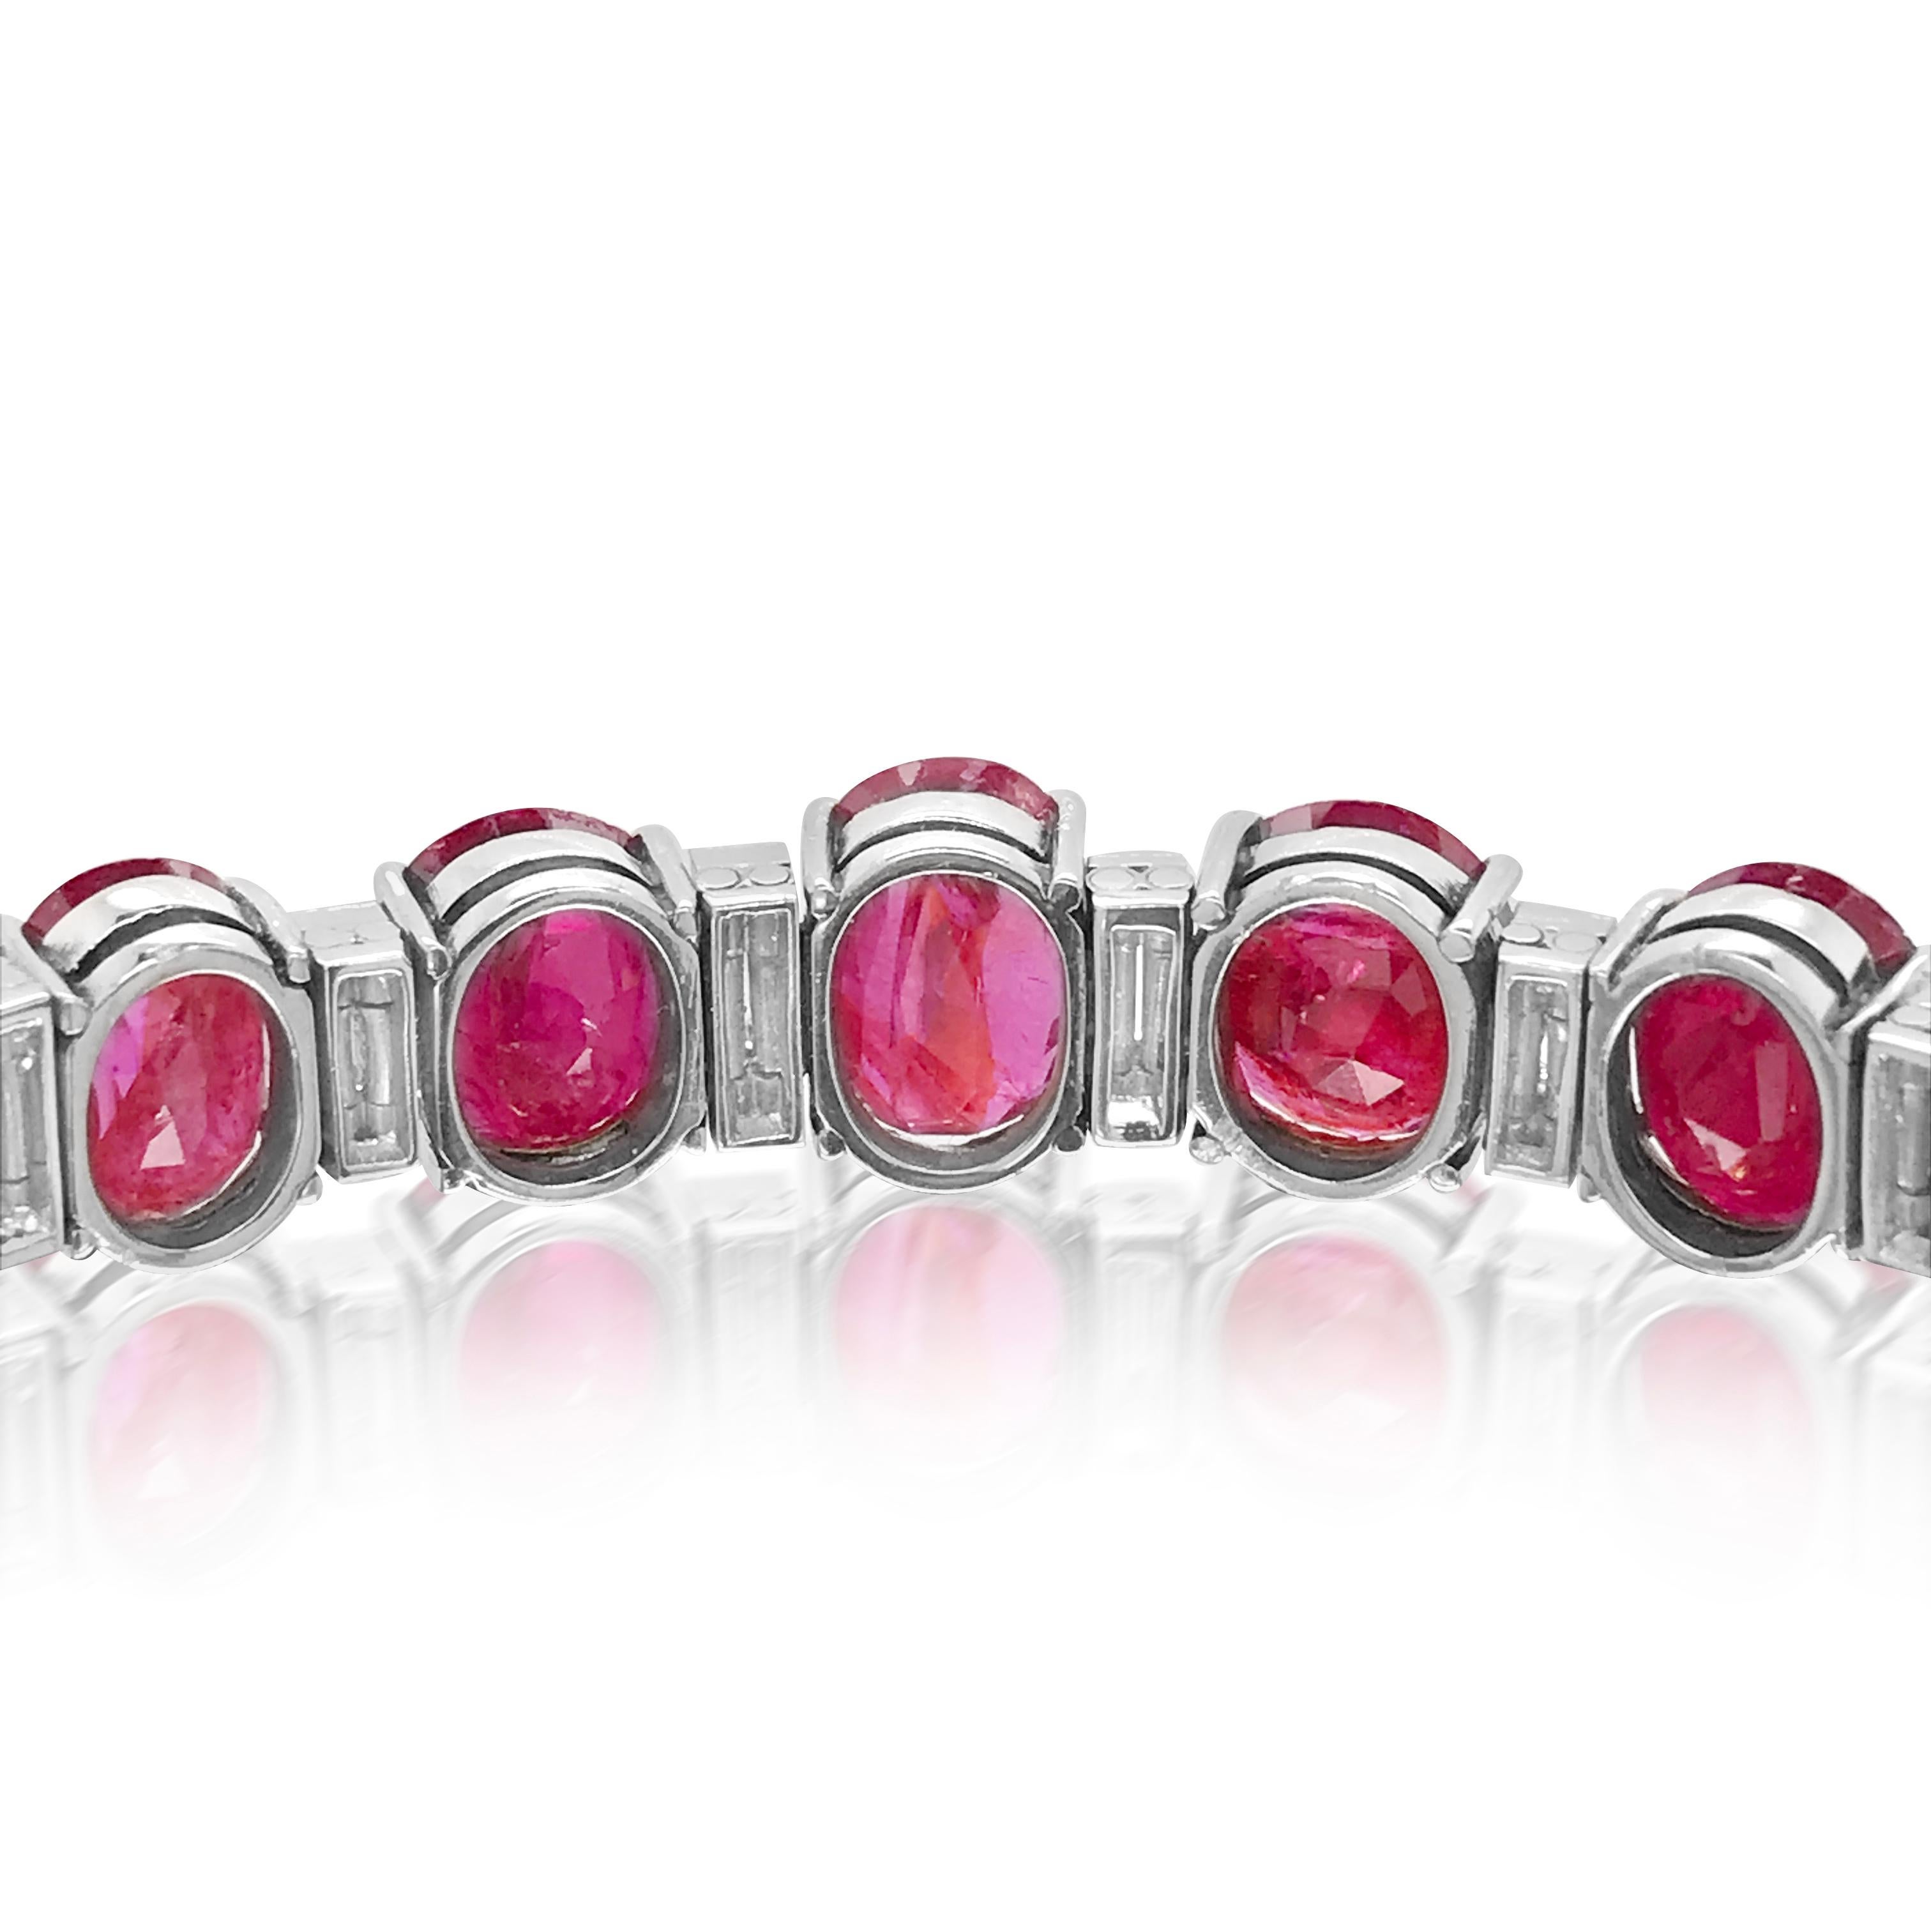 This ruby diamond bracelet crafted in solid platinum weighs 35.42 grams and measures  16.2 cm (6.4 inches) long. The 14 rubies weigh cumulatively 41 carats, linked by 18 baguette-cut diamonds weighing 2.4 carats. 

Ruby total weight: 41ct
Diamond